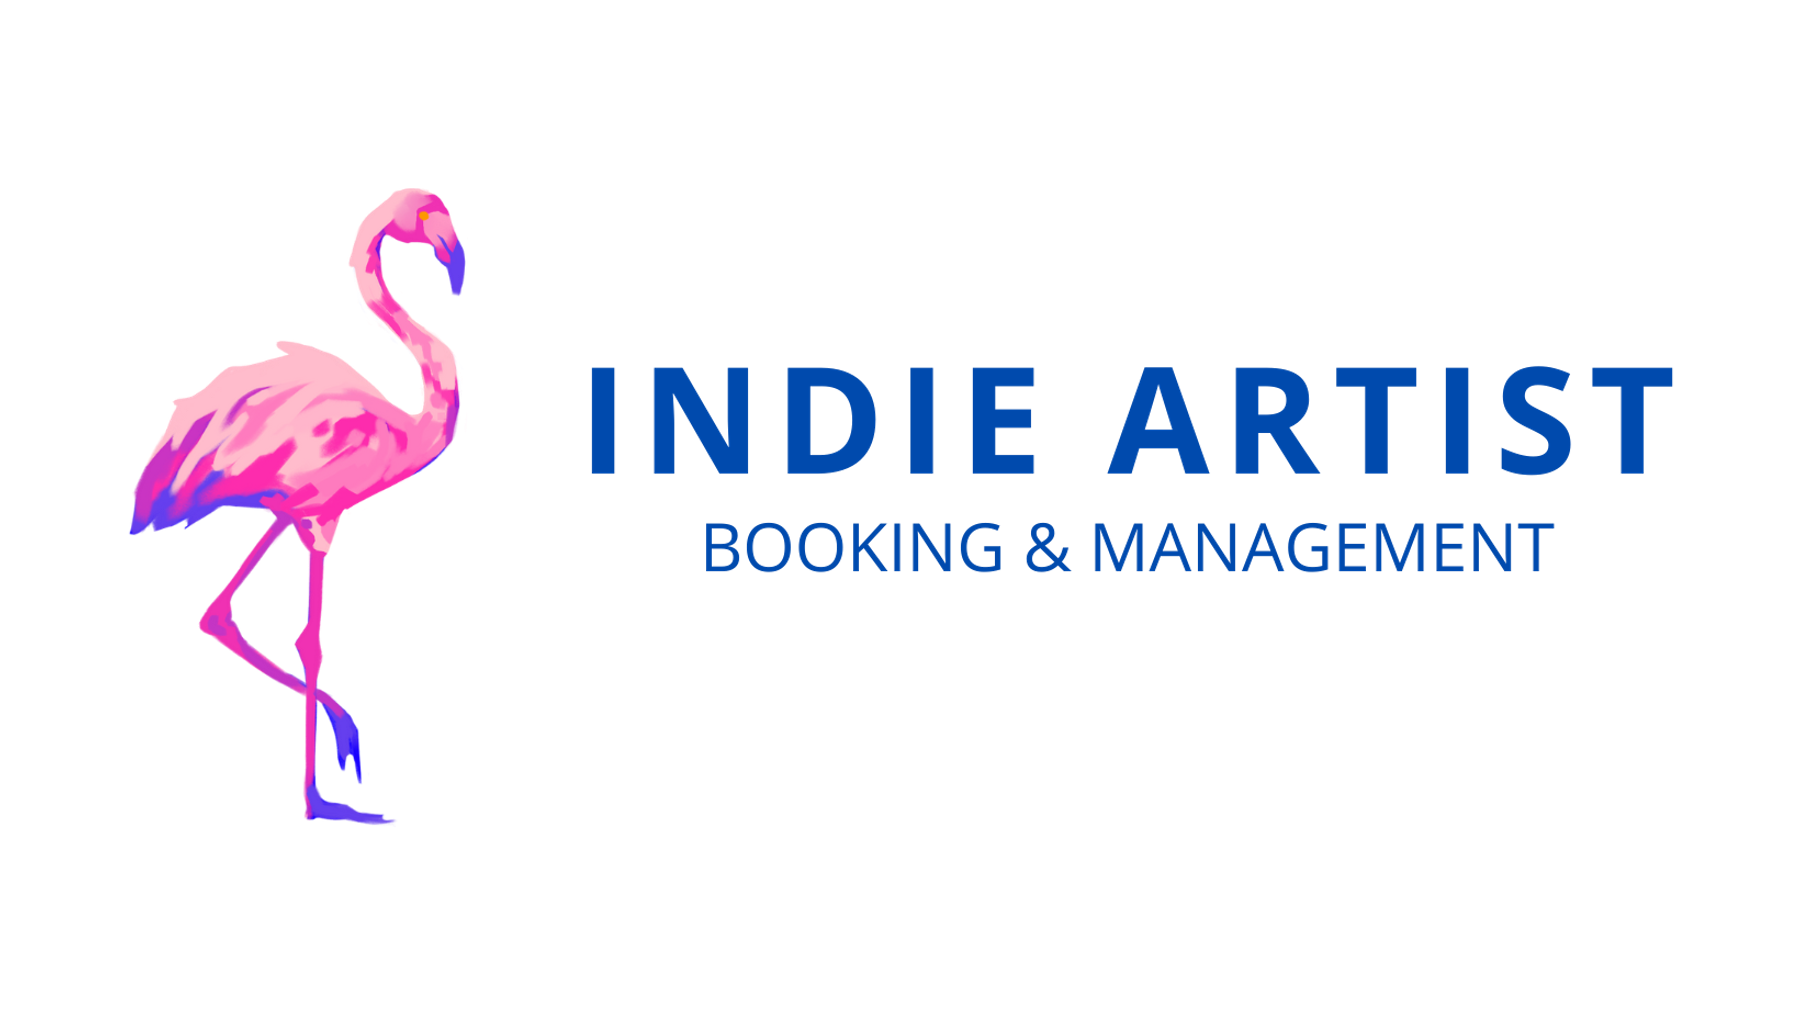 Indie Artist Booking & Management Company